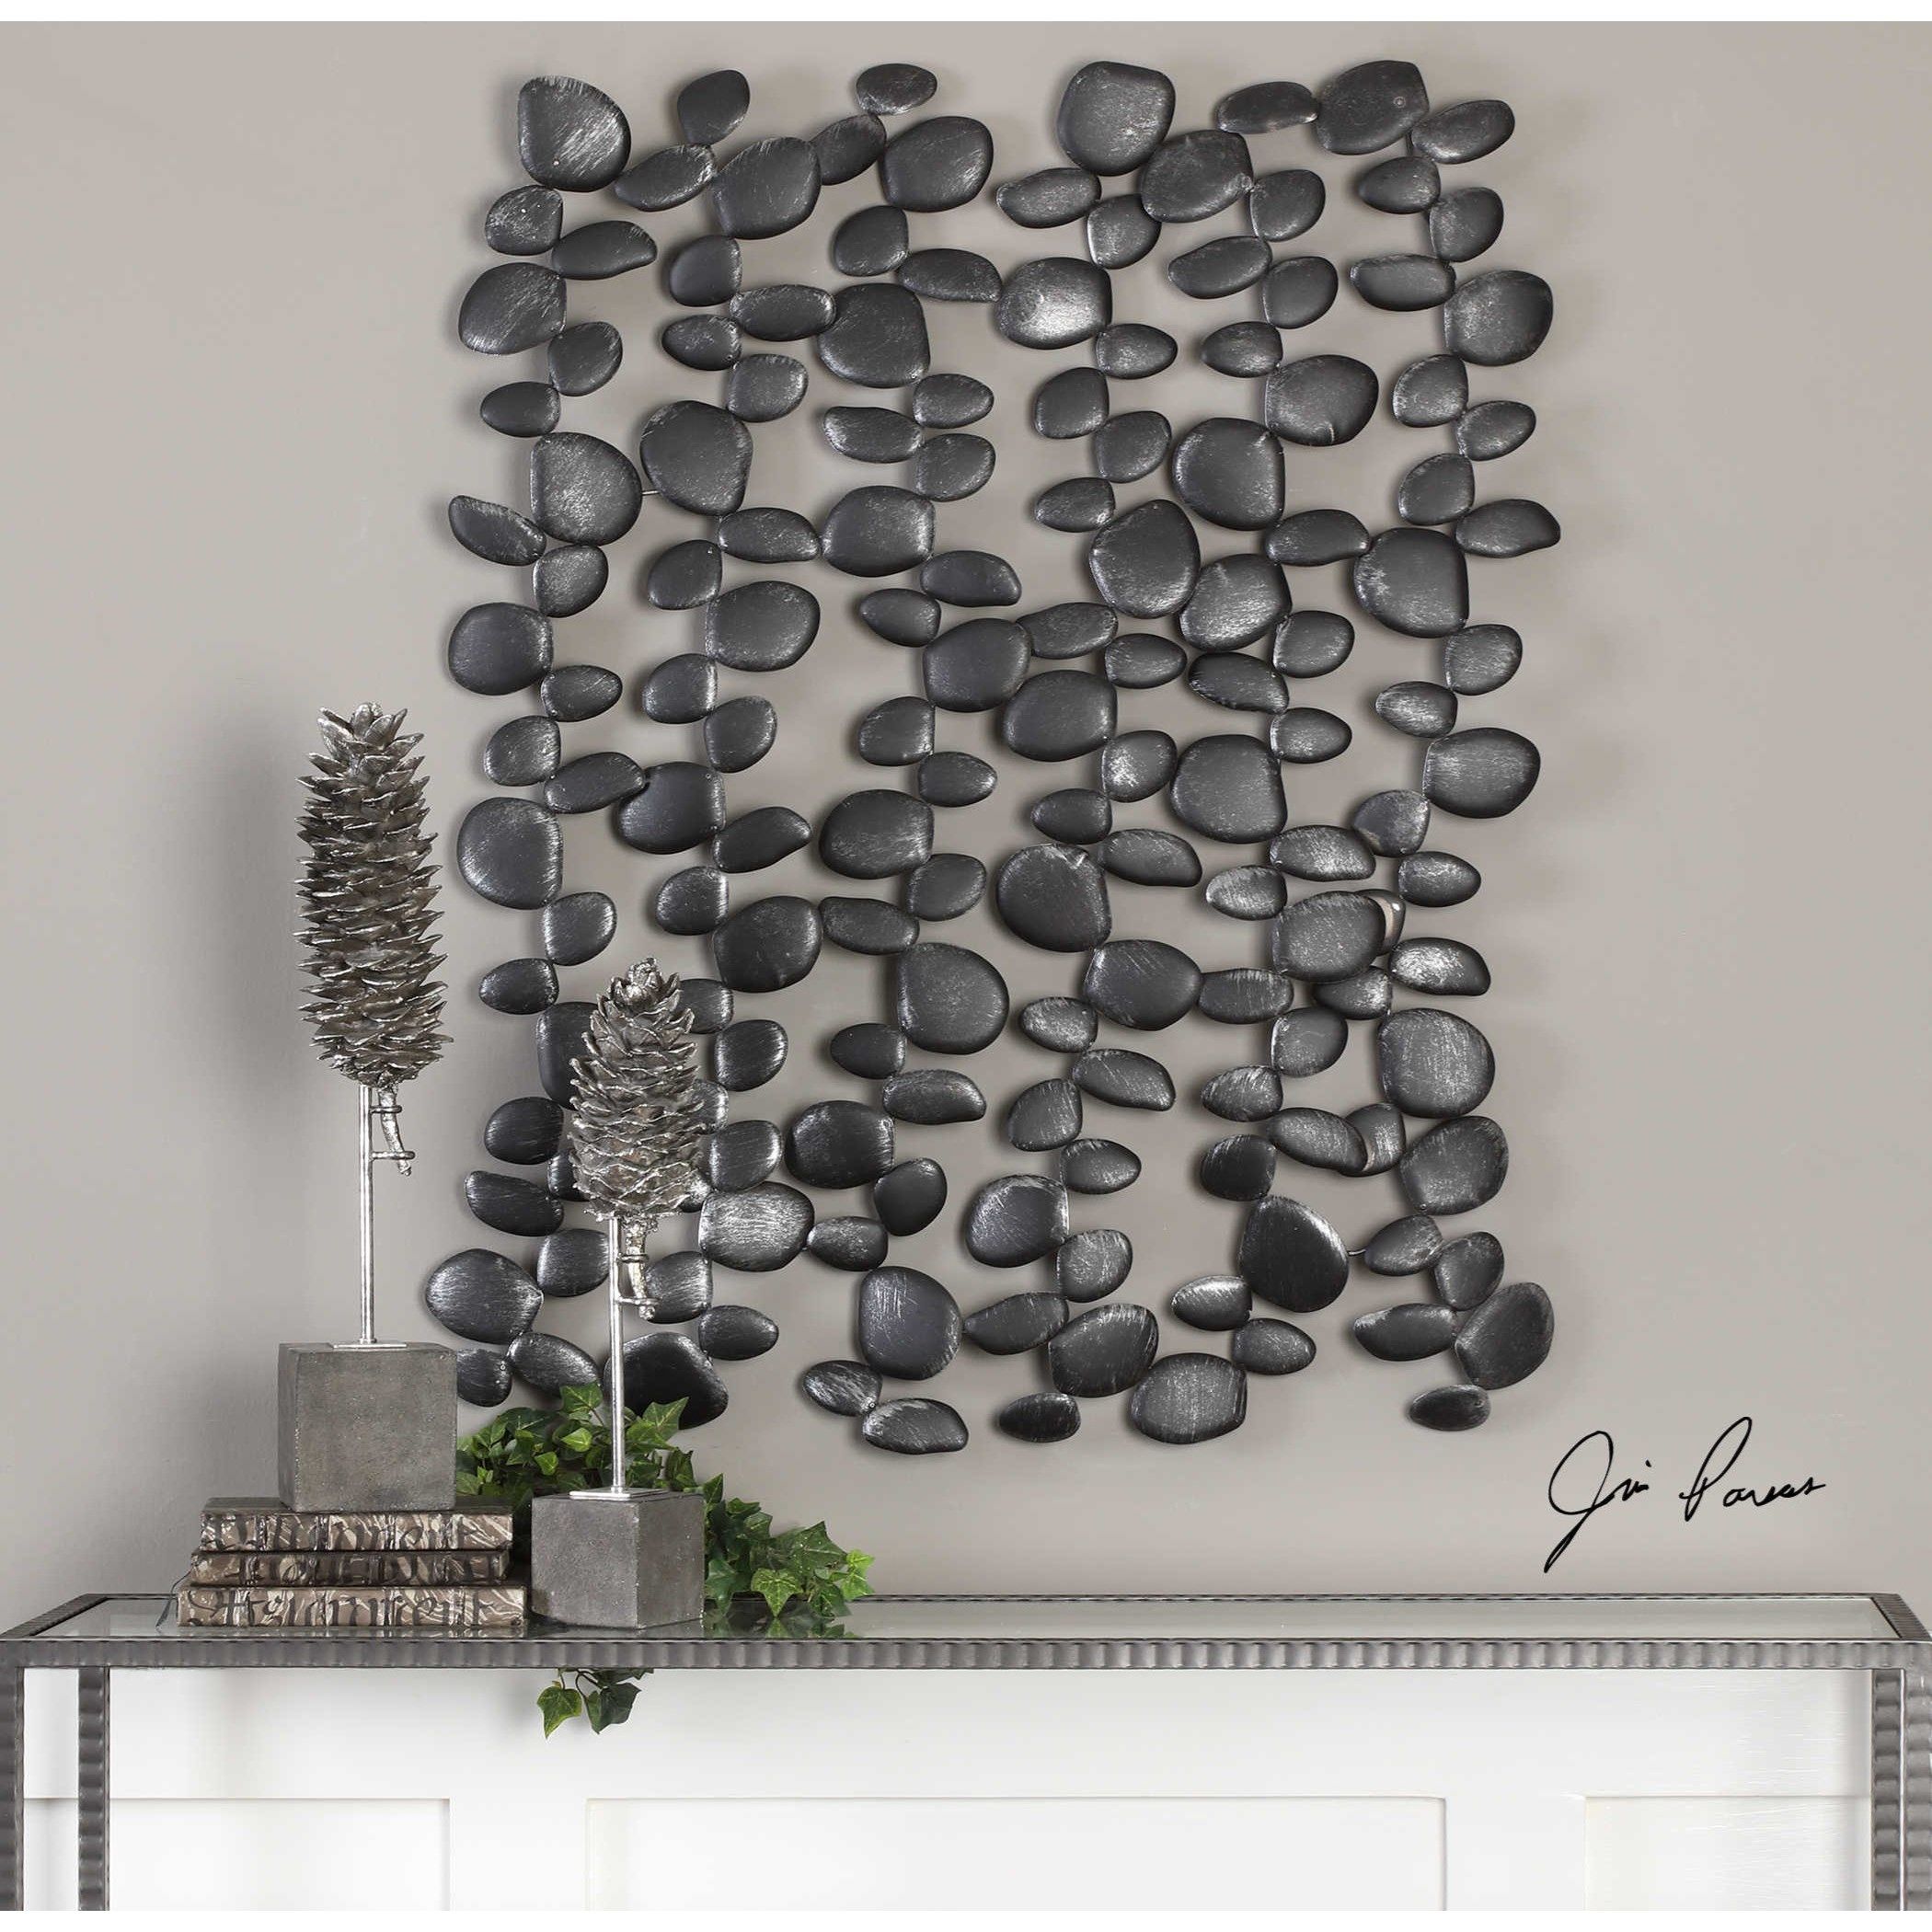 Uttermost Alternative Wall Decor Skipping Stones 3 Dimensional Piece Intended For 2017 3 Dimensional Wall Art (View 9 of 20)